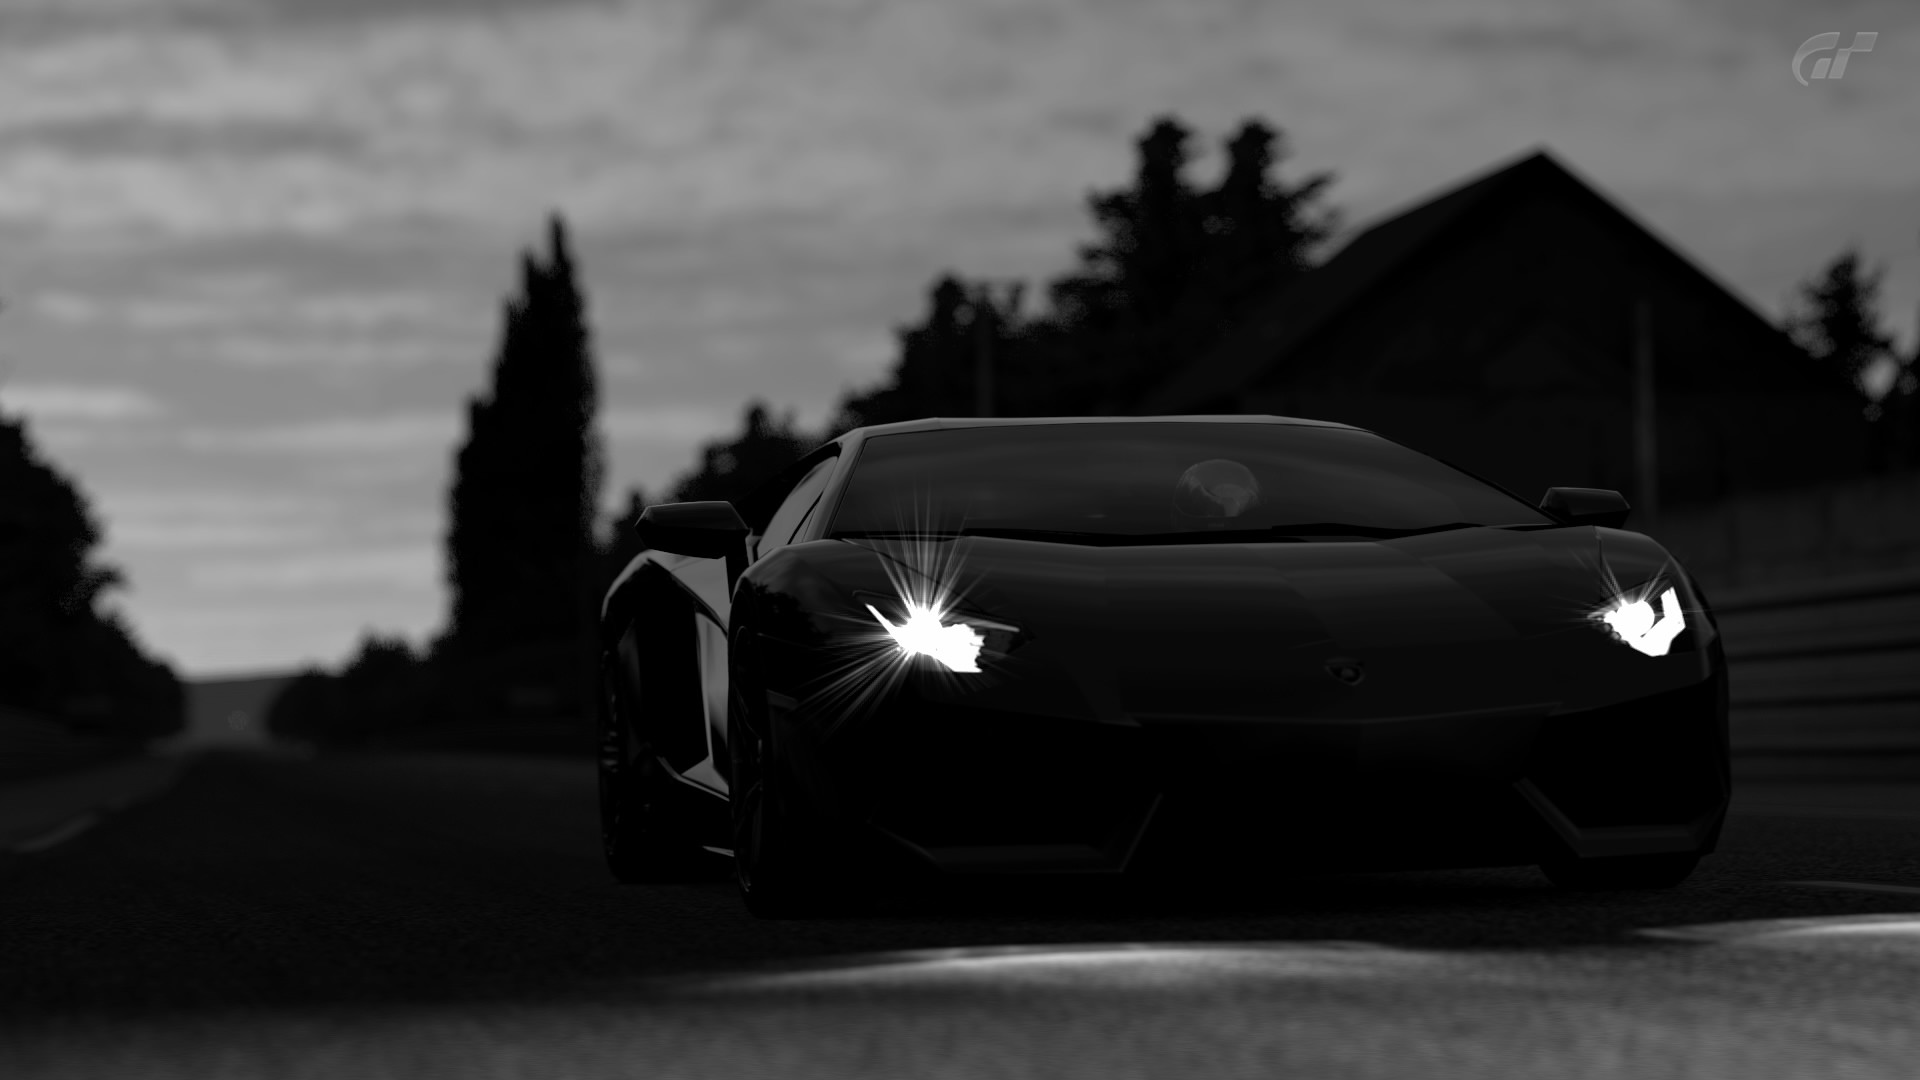 Lamborghini Aventador Svj Wallpapers posted by Zoey Peltier